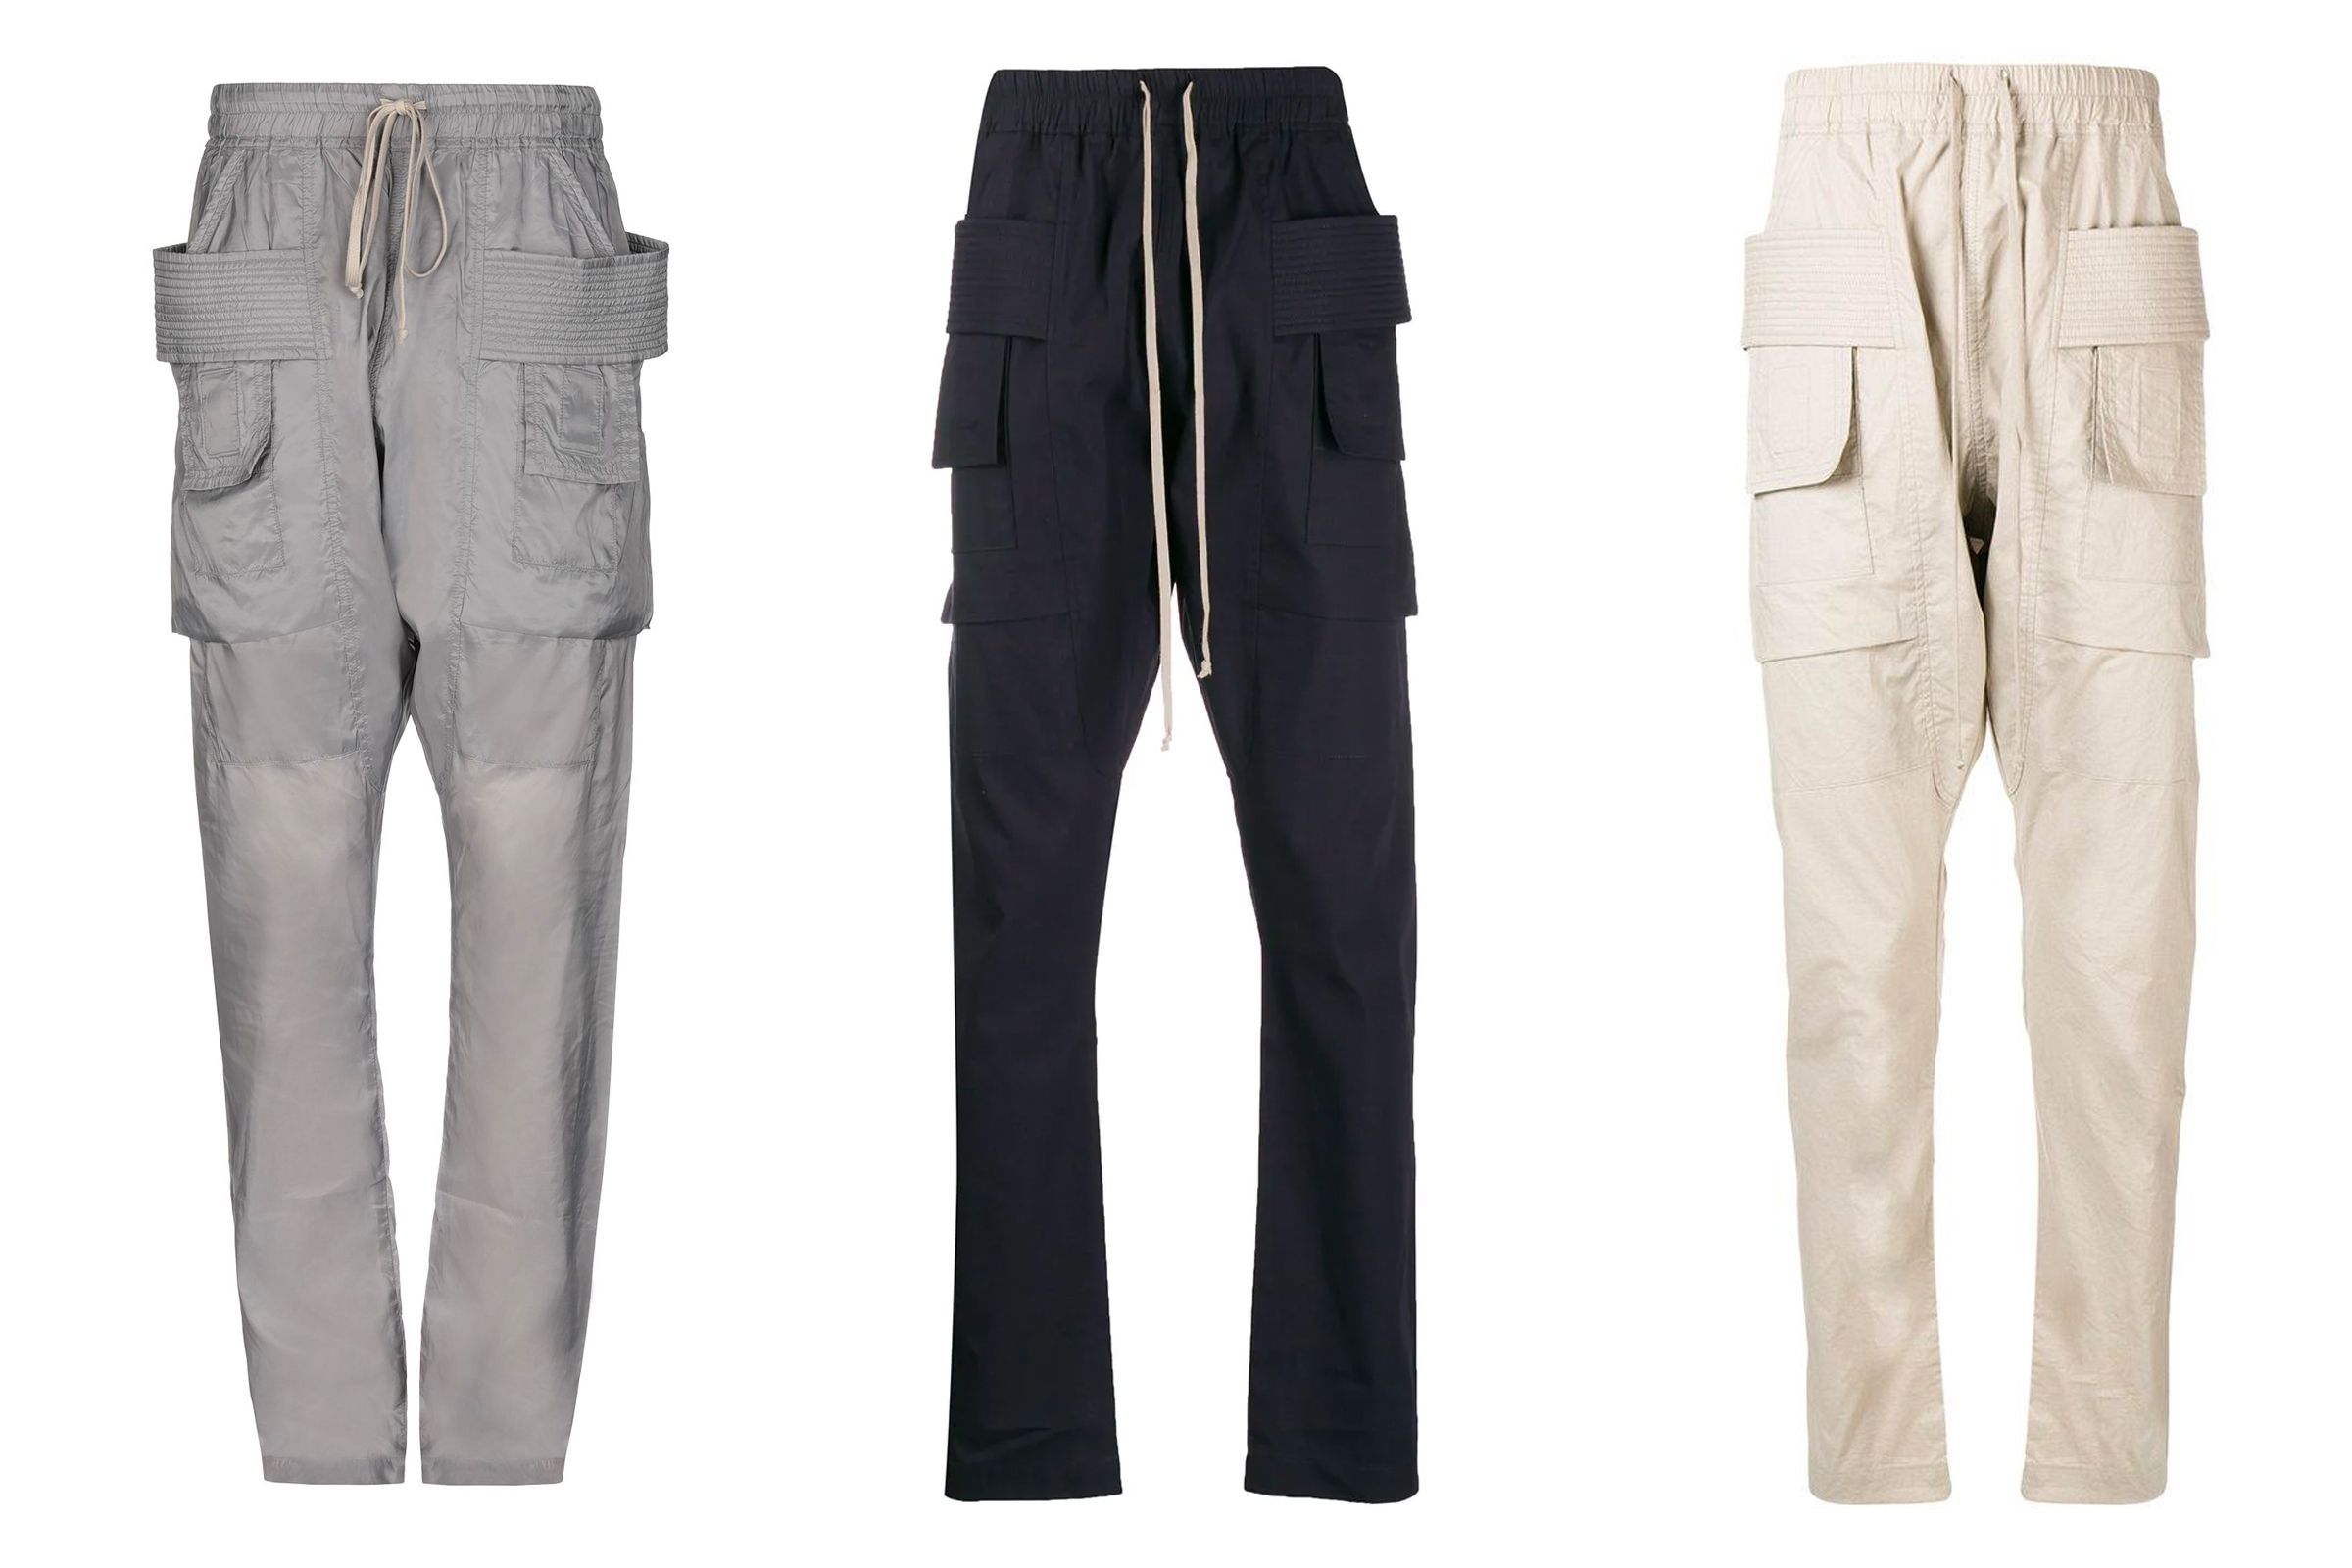 Classic or Trash: Rick Owens Creatch Cargo Pant | Grailed